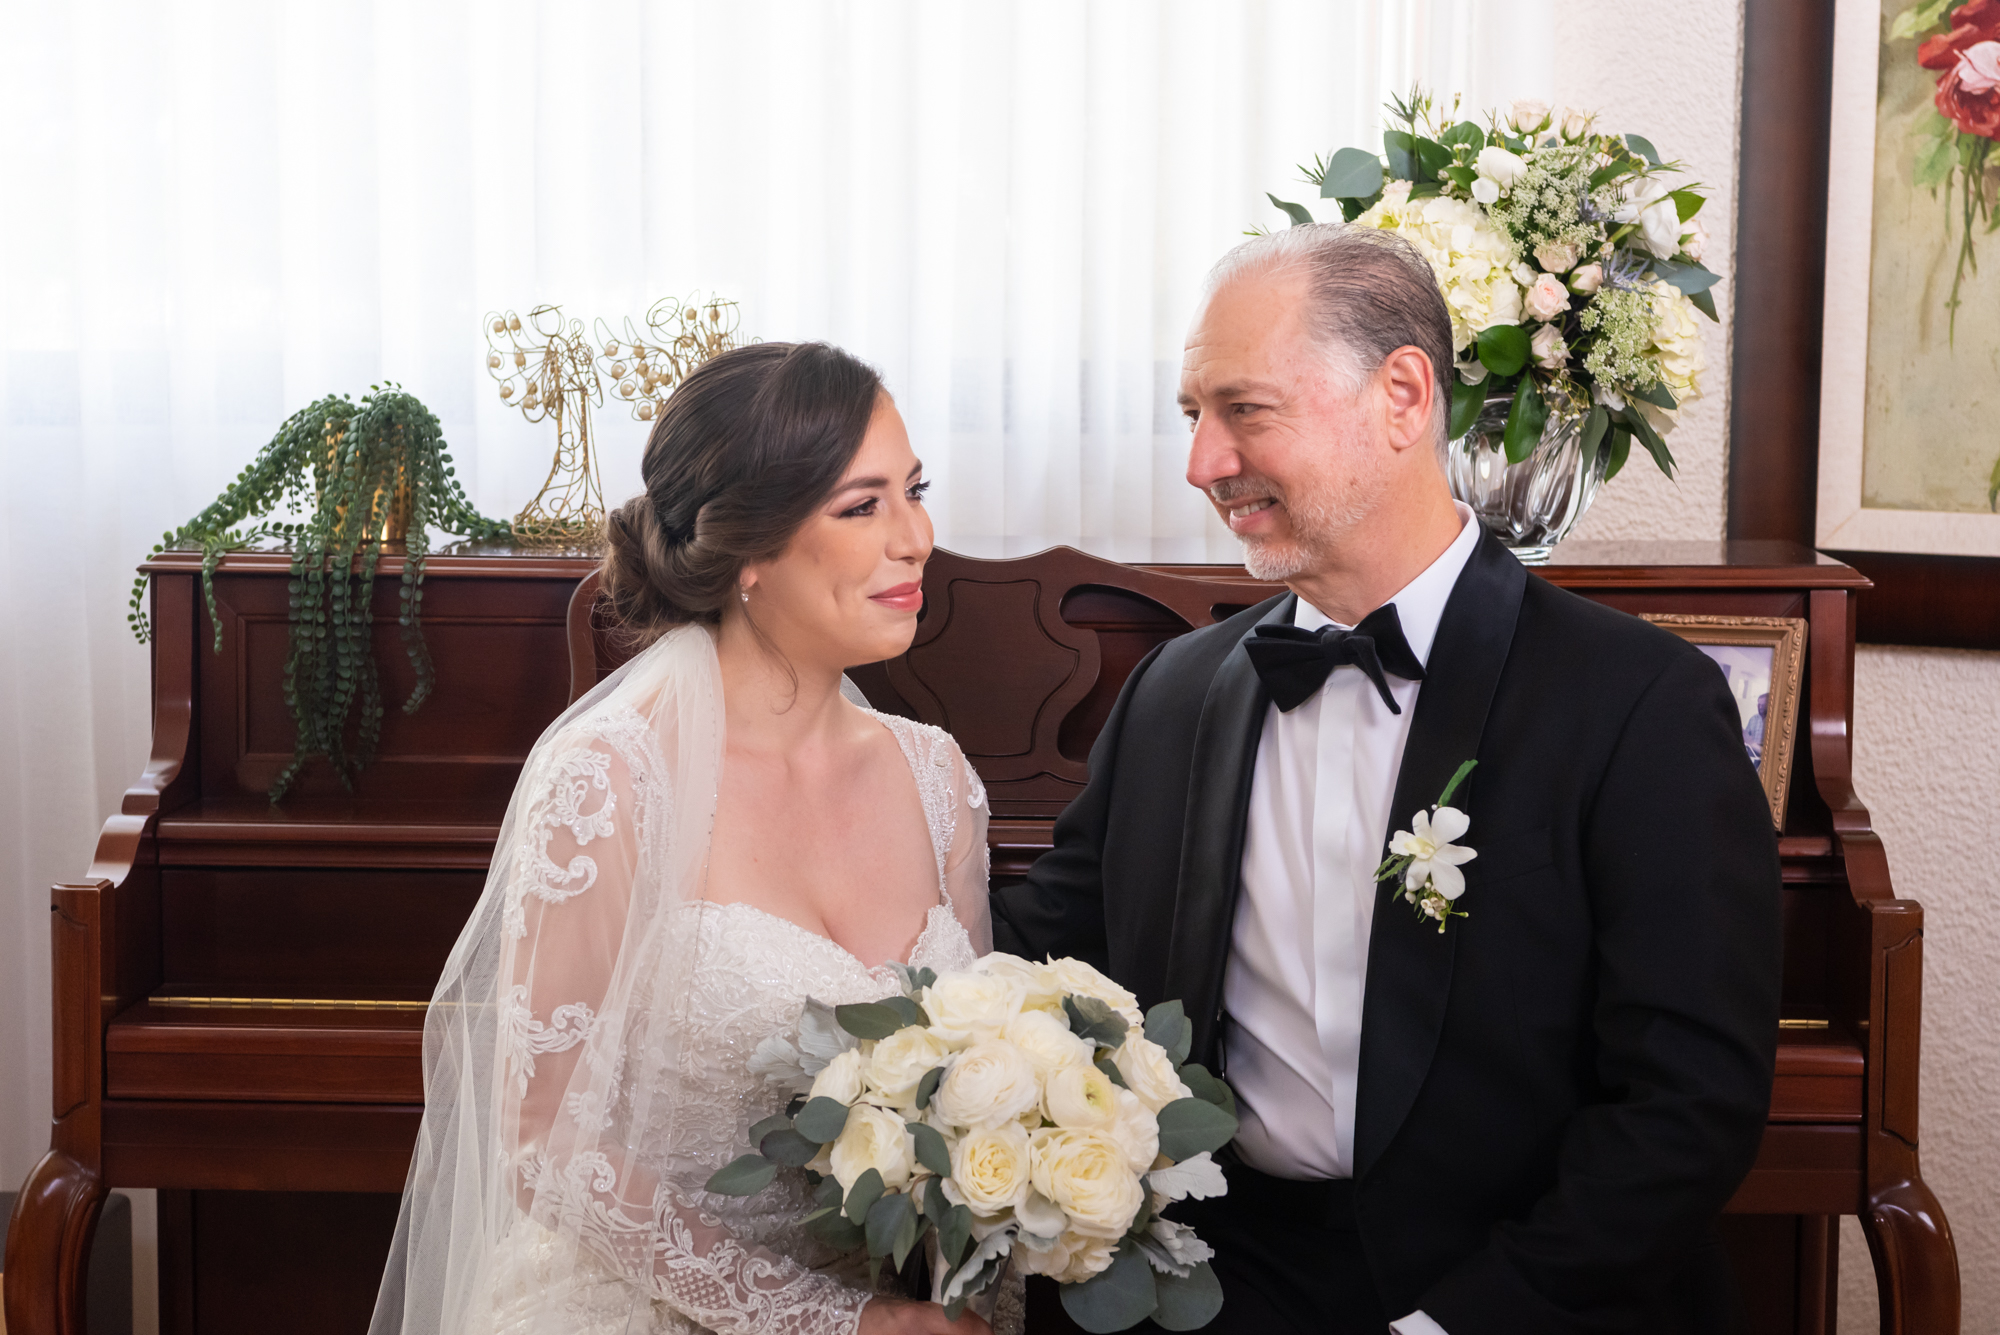 Bride and her dad looking at each other